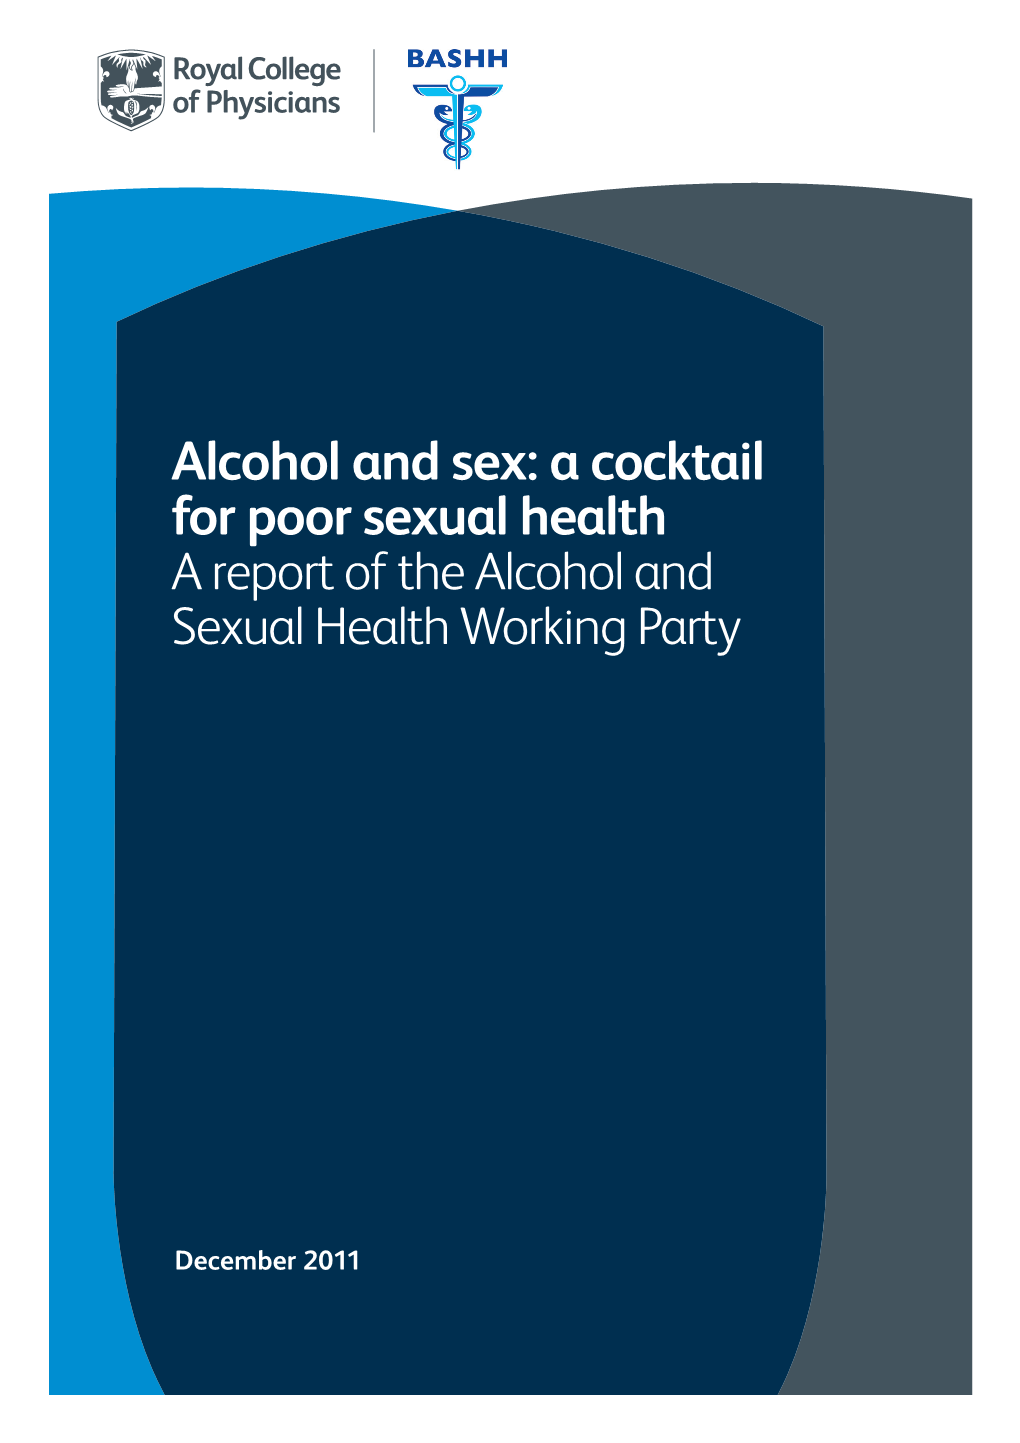 Alcohol and Sex: a Cocktail for Poor Sexual Health. Report of the Alcohol and Sexual Health Working Party